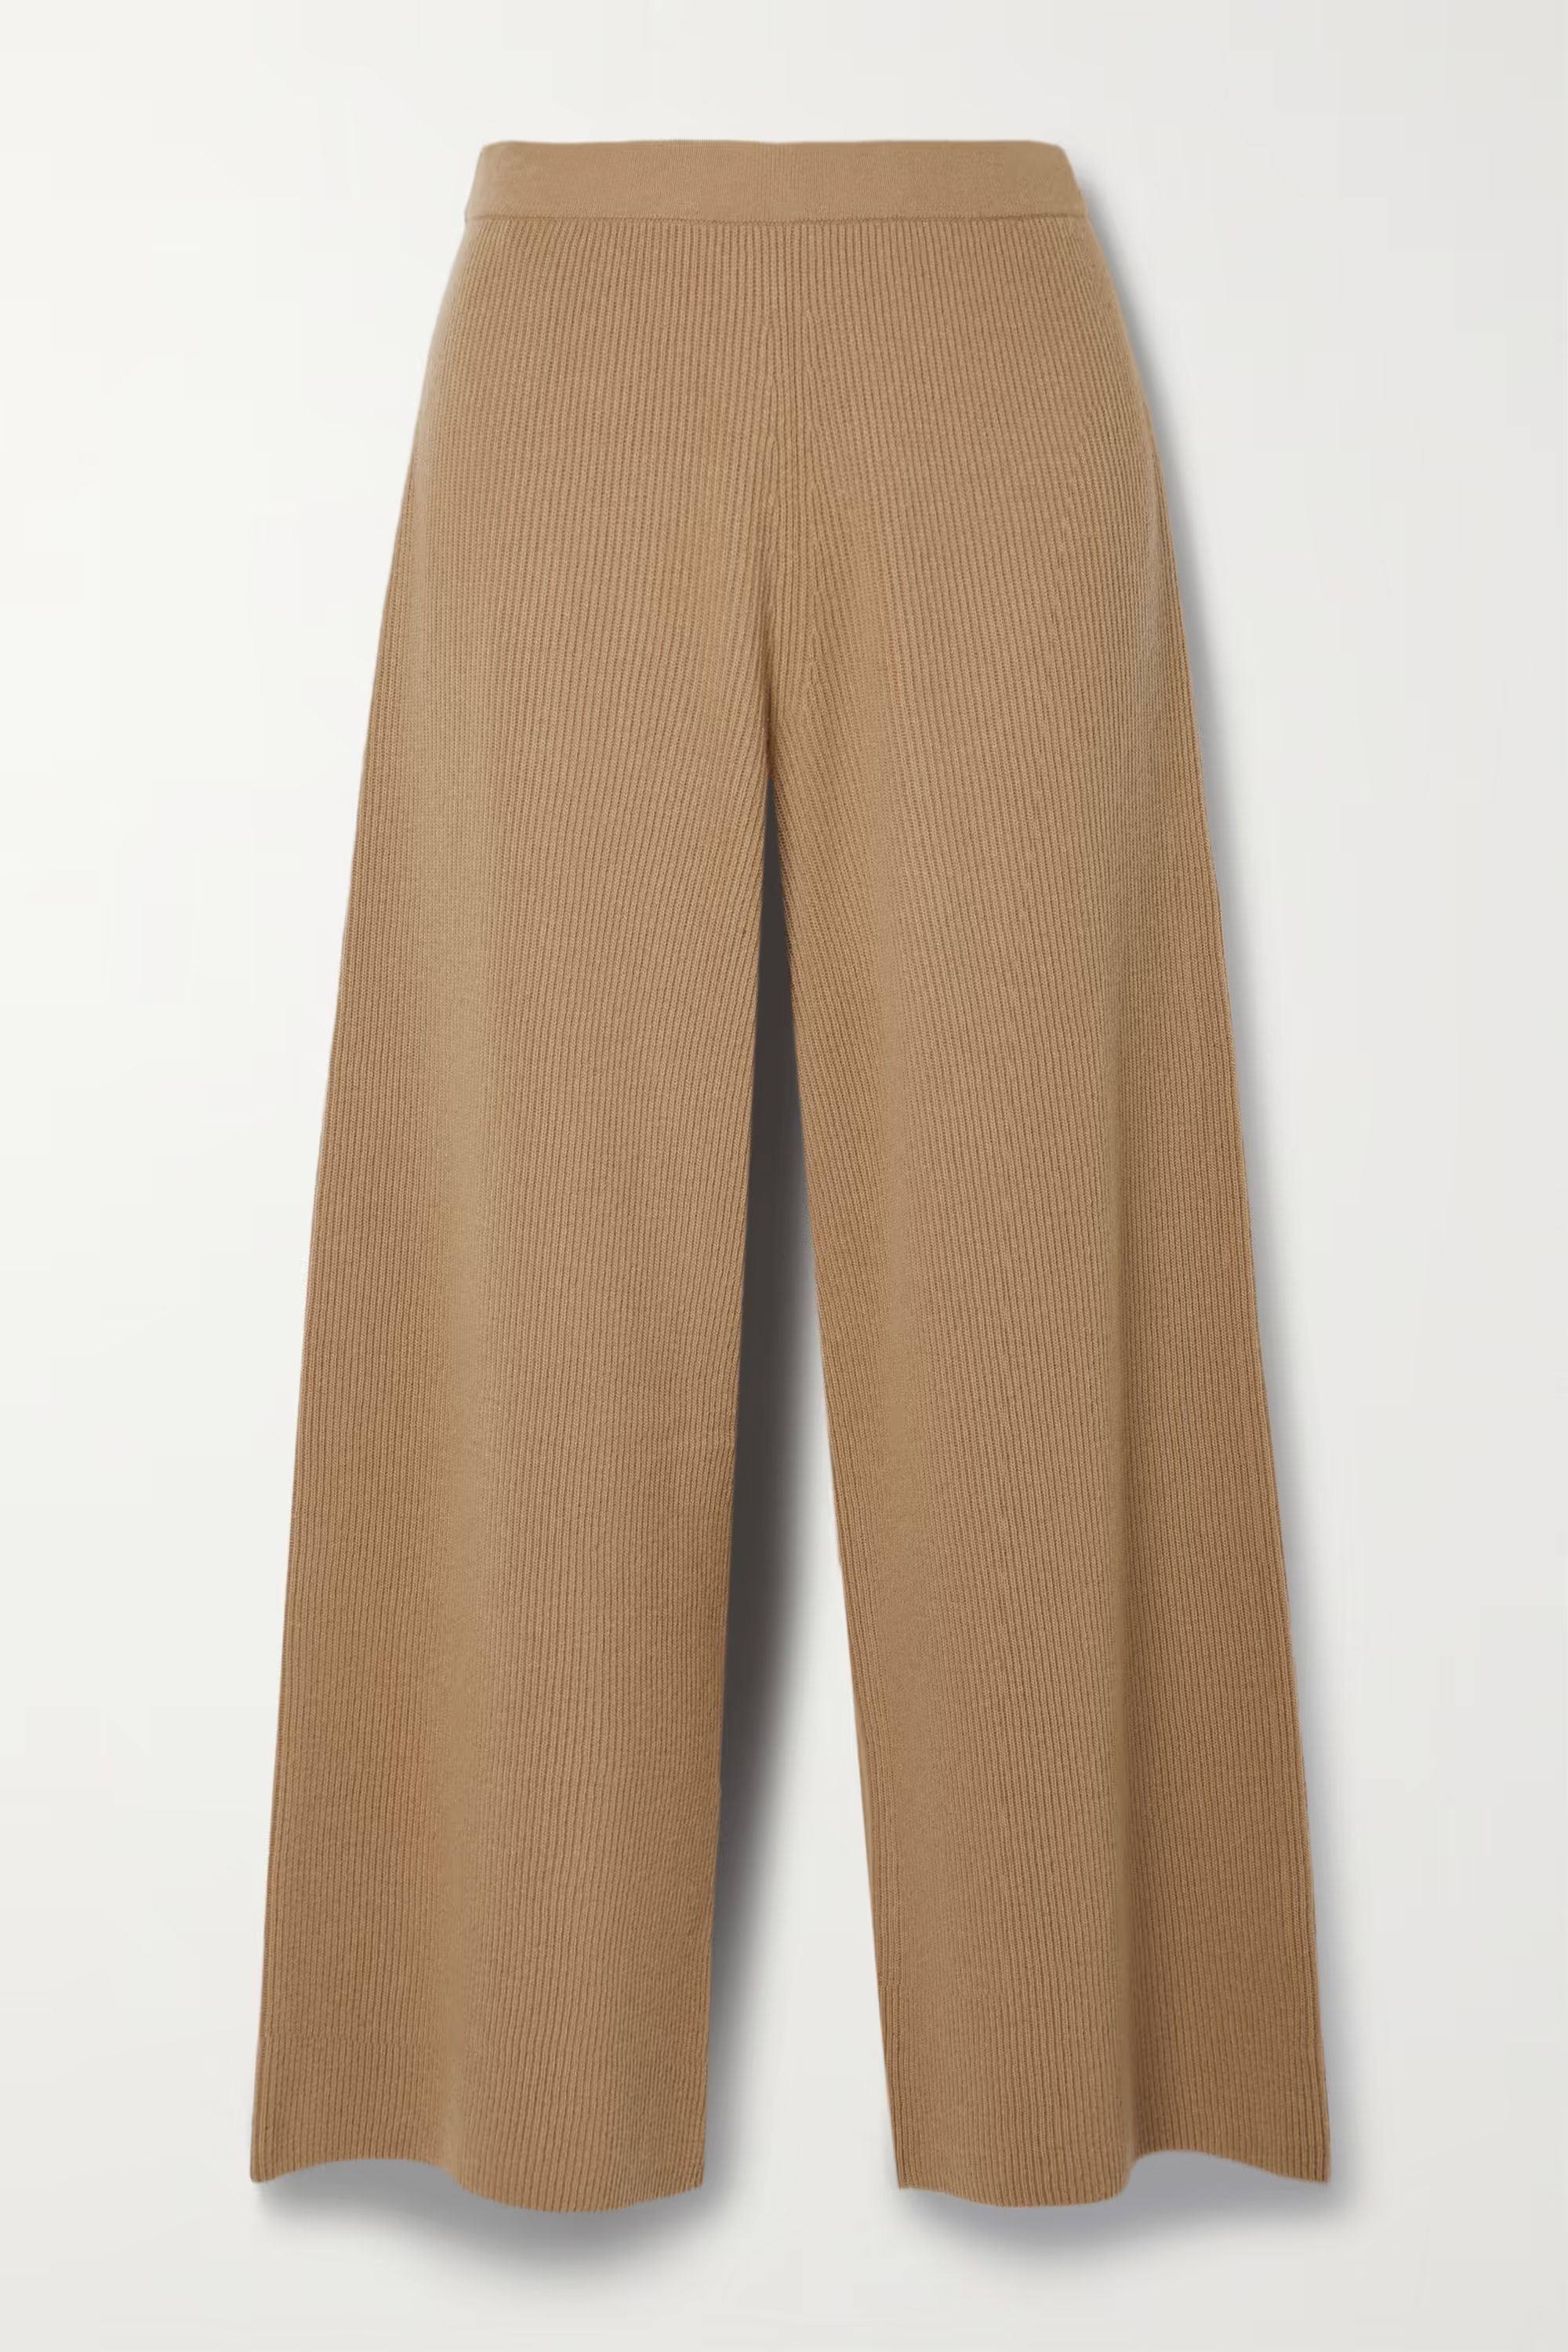 Tan Ribbed wool and cashmere-blend wide-leg pants | THEORY | NET-A-PORTER | NET-A-PORTER (US)